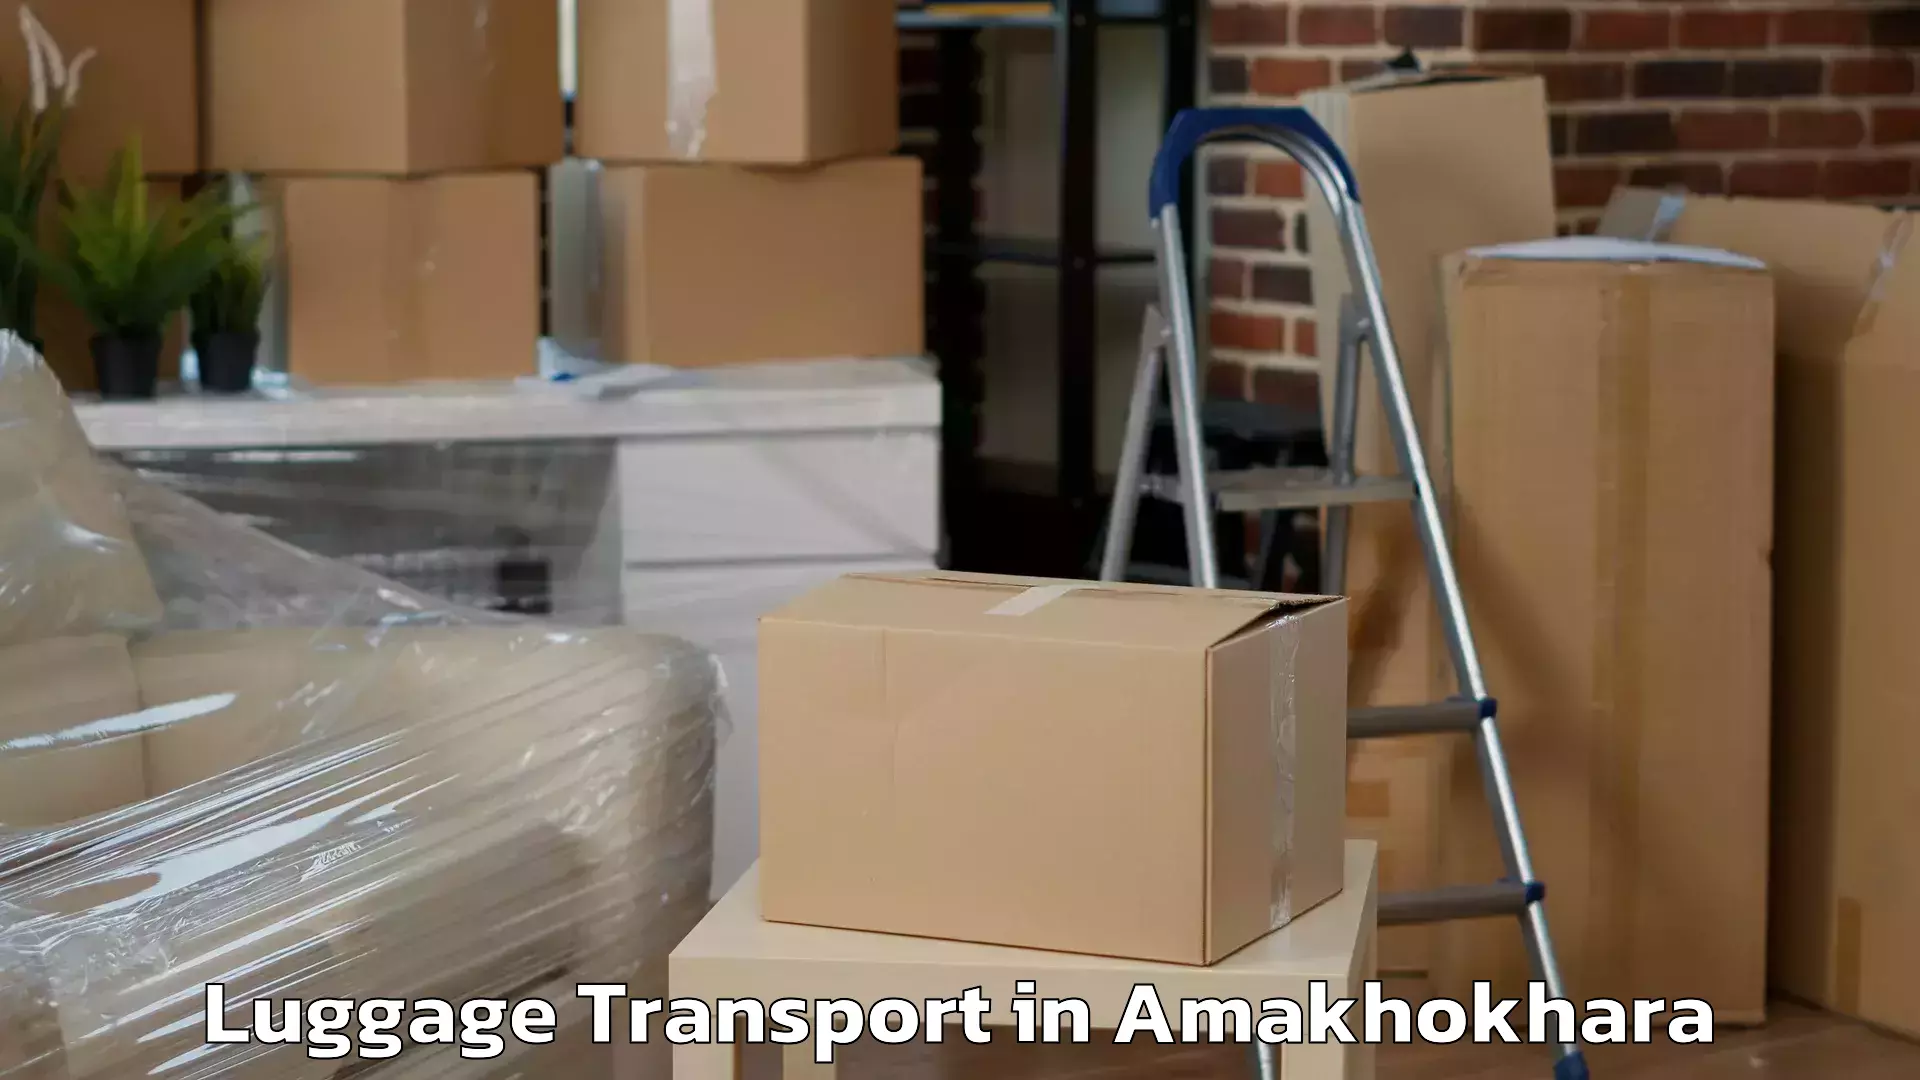 Premium luggage delivery in Amakhokhara